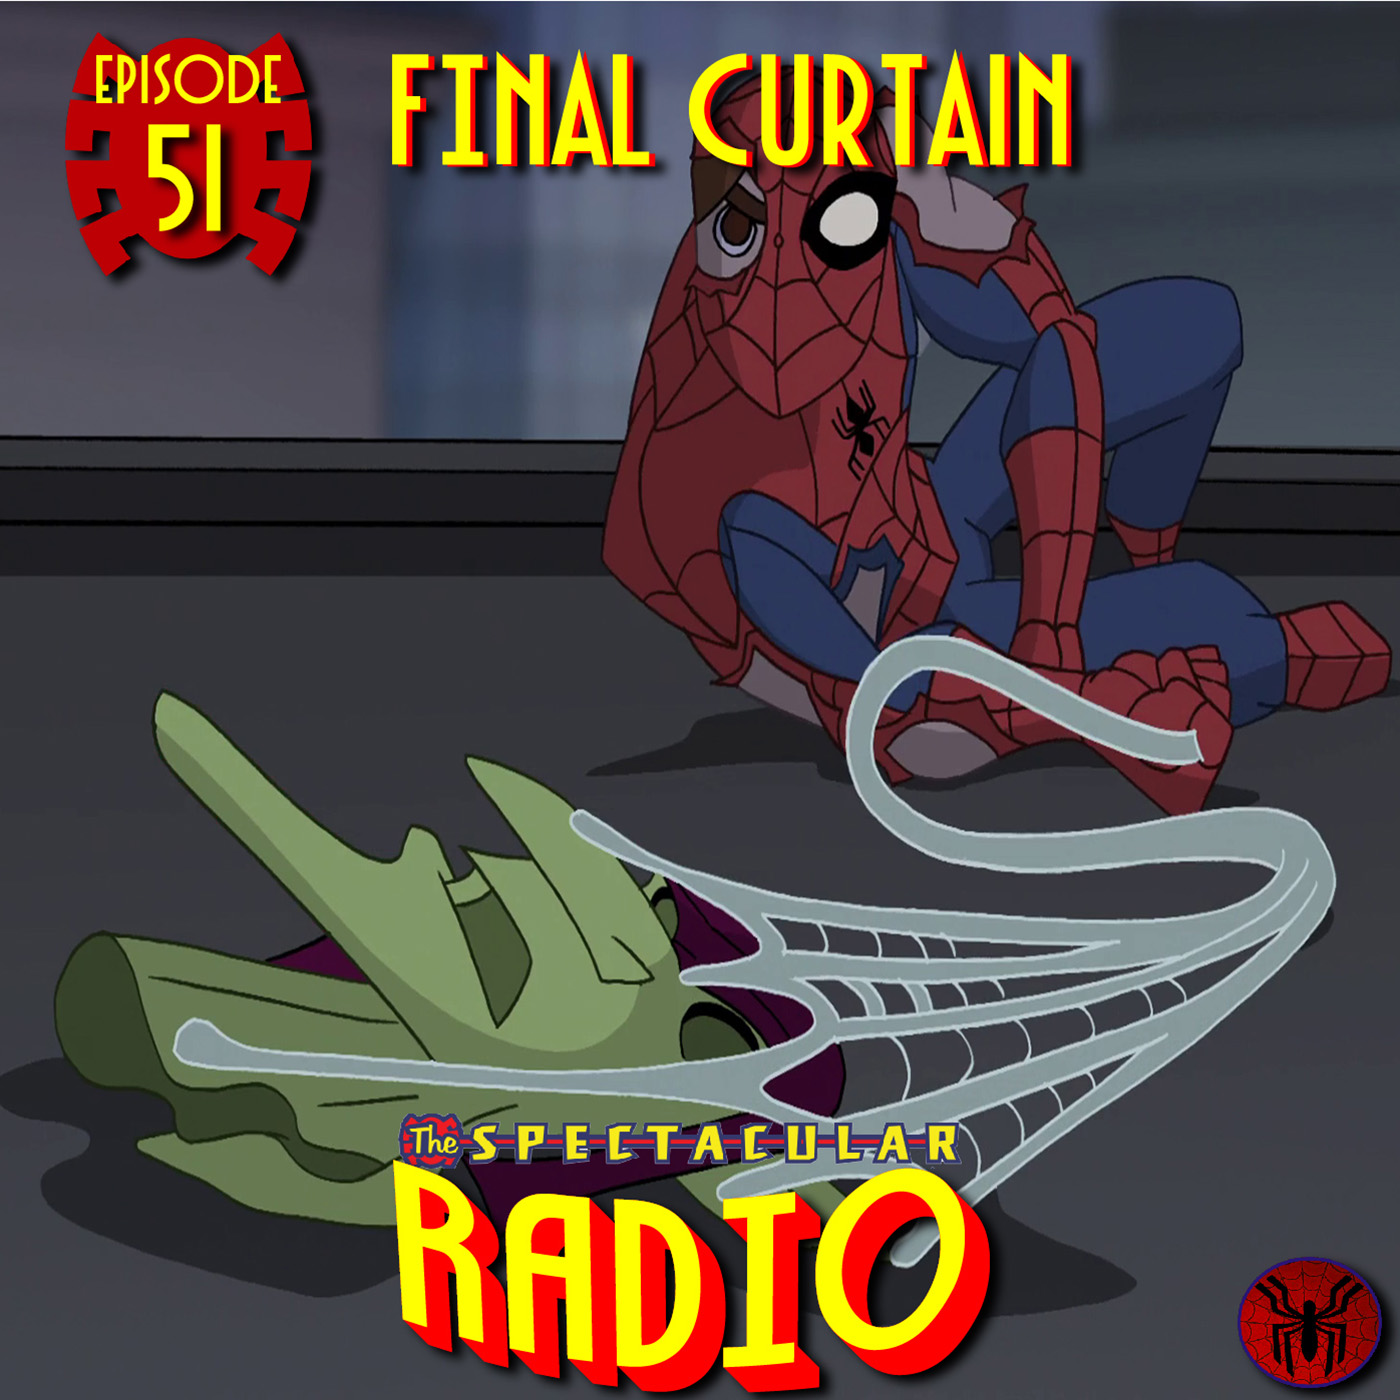 Spectacular Radio Episode 51: “Final Curtain” with Greg Weisman & Victor Cook